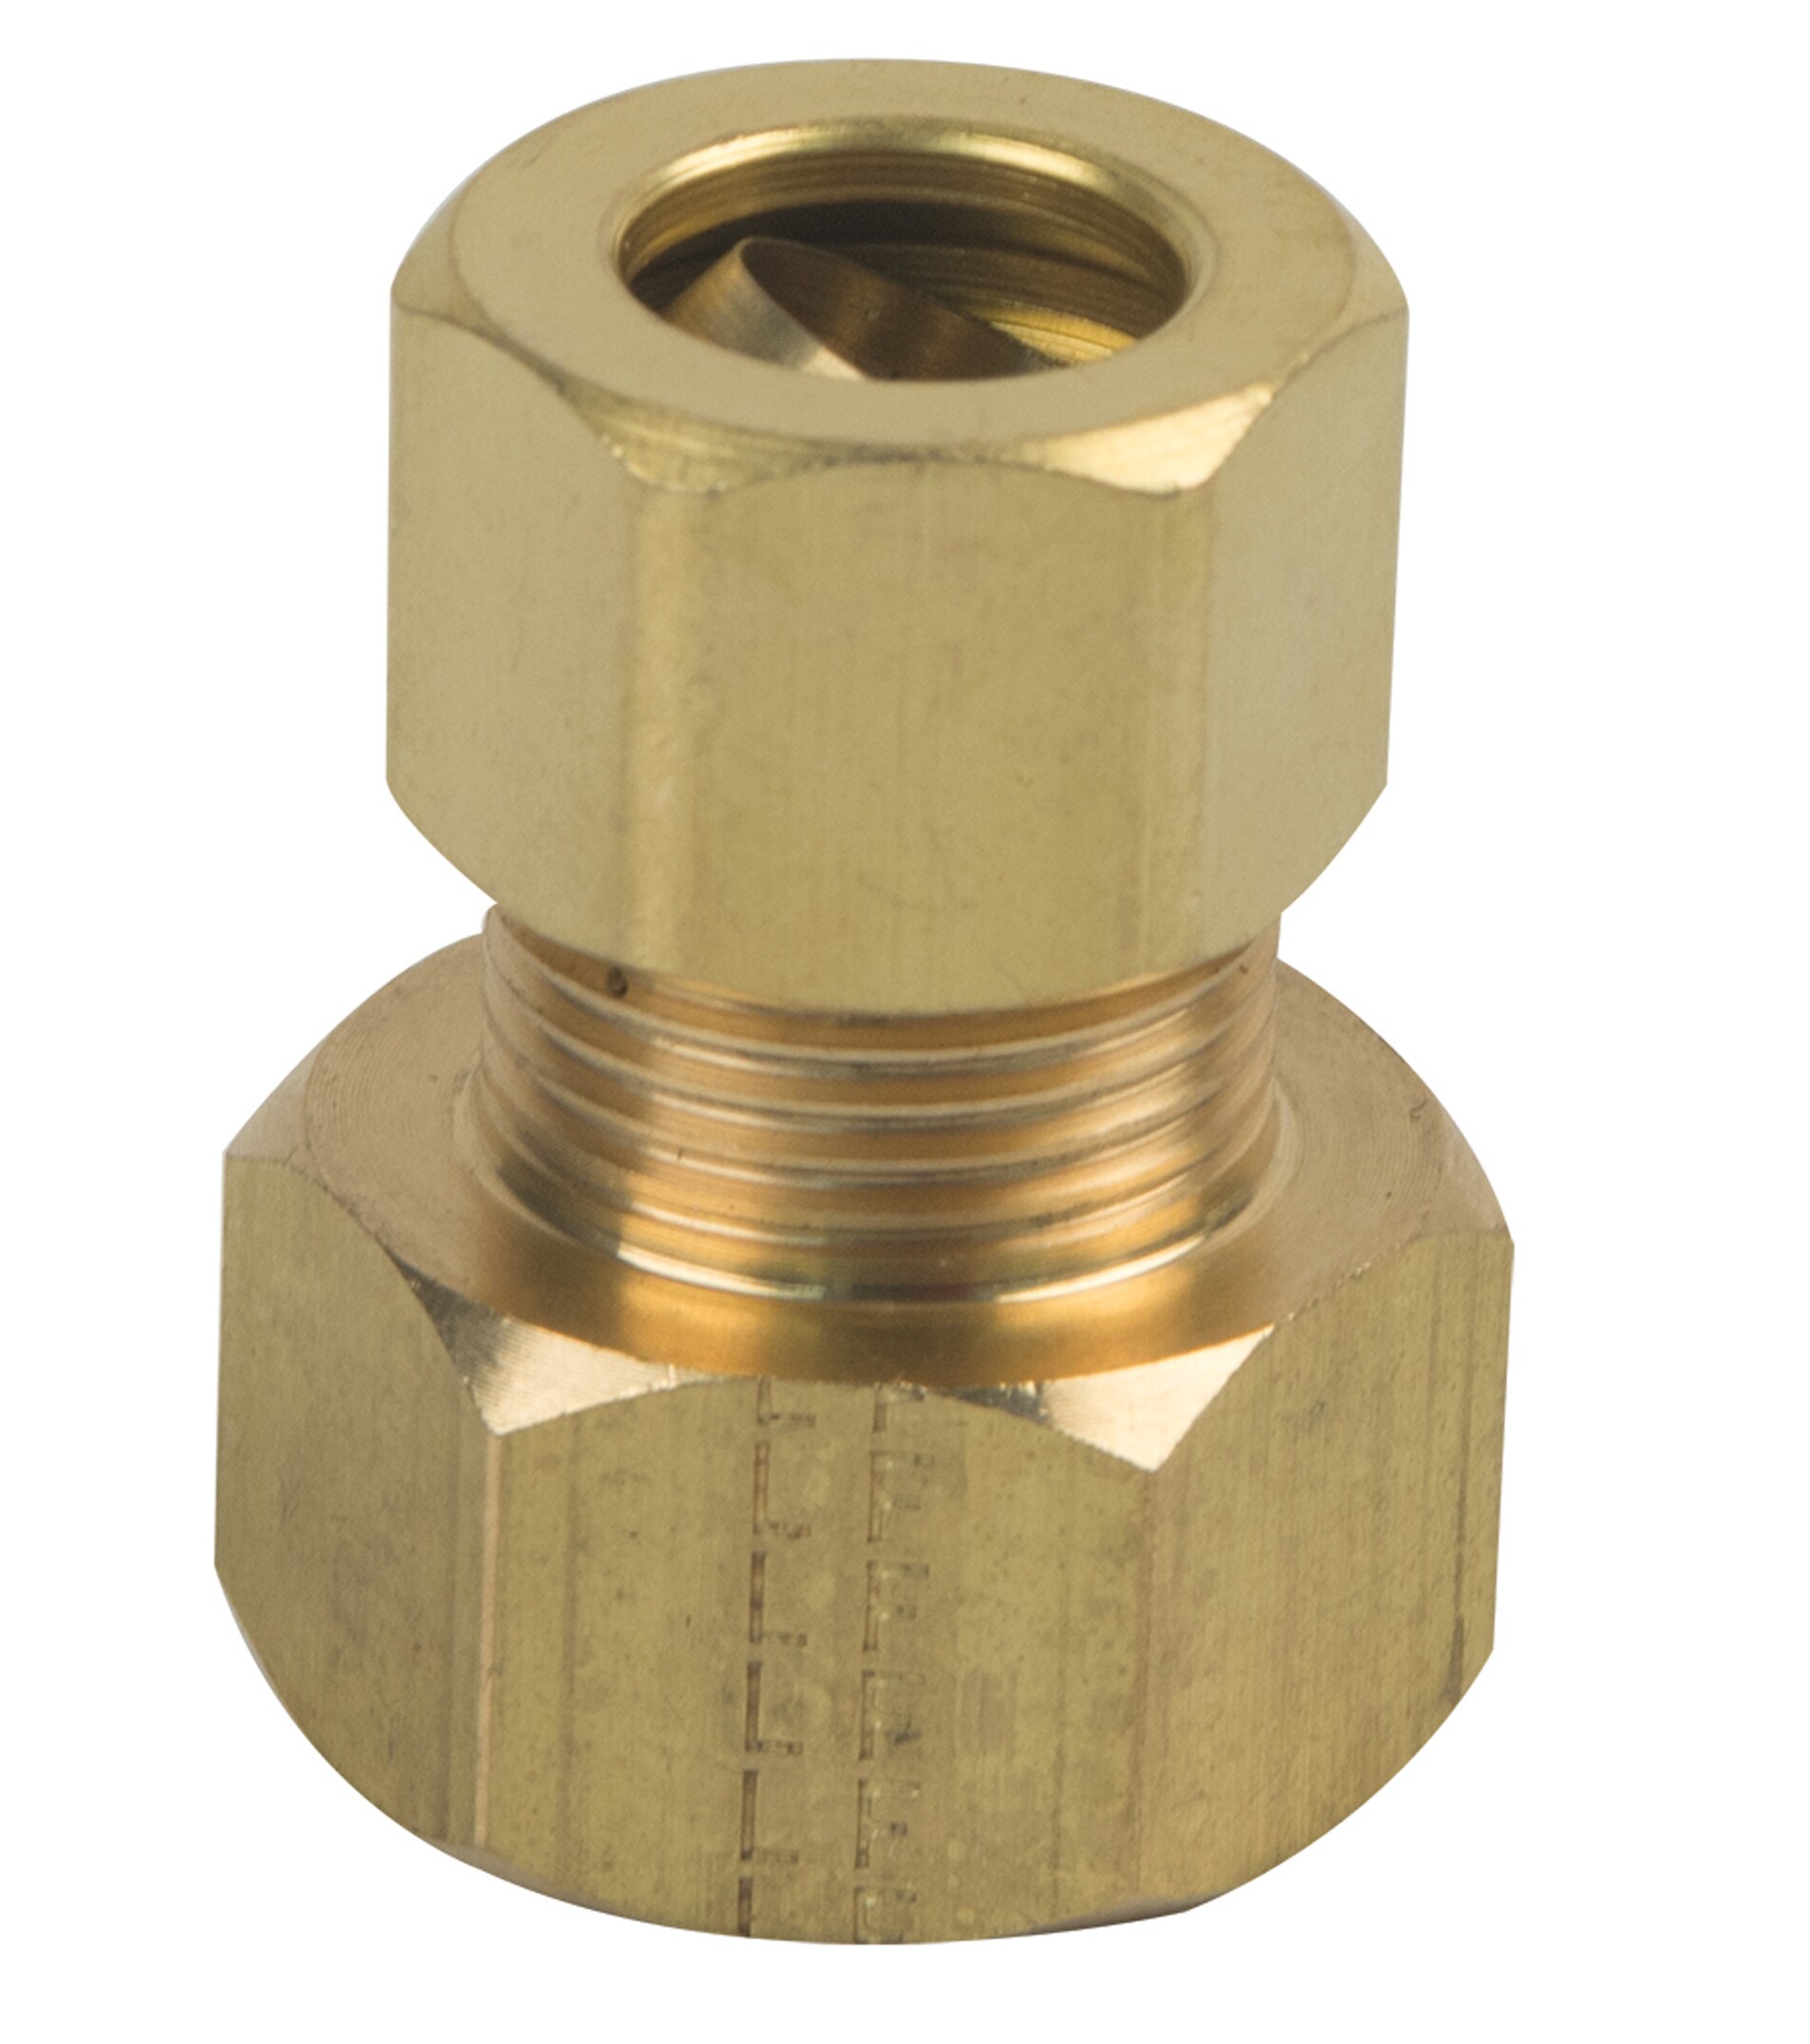 Internal Reducer 3 Part Reducer For Compression Fittings Range Of Sizes 